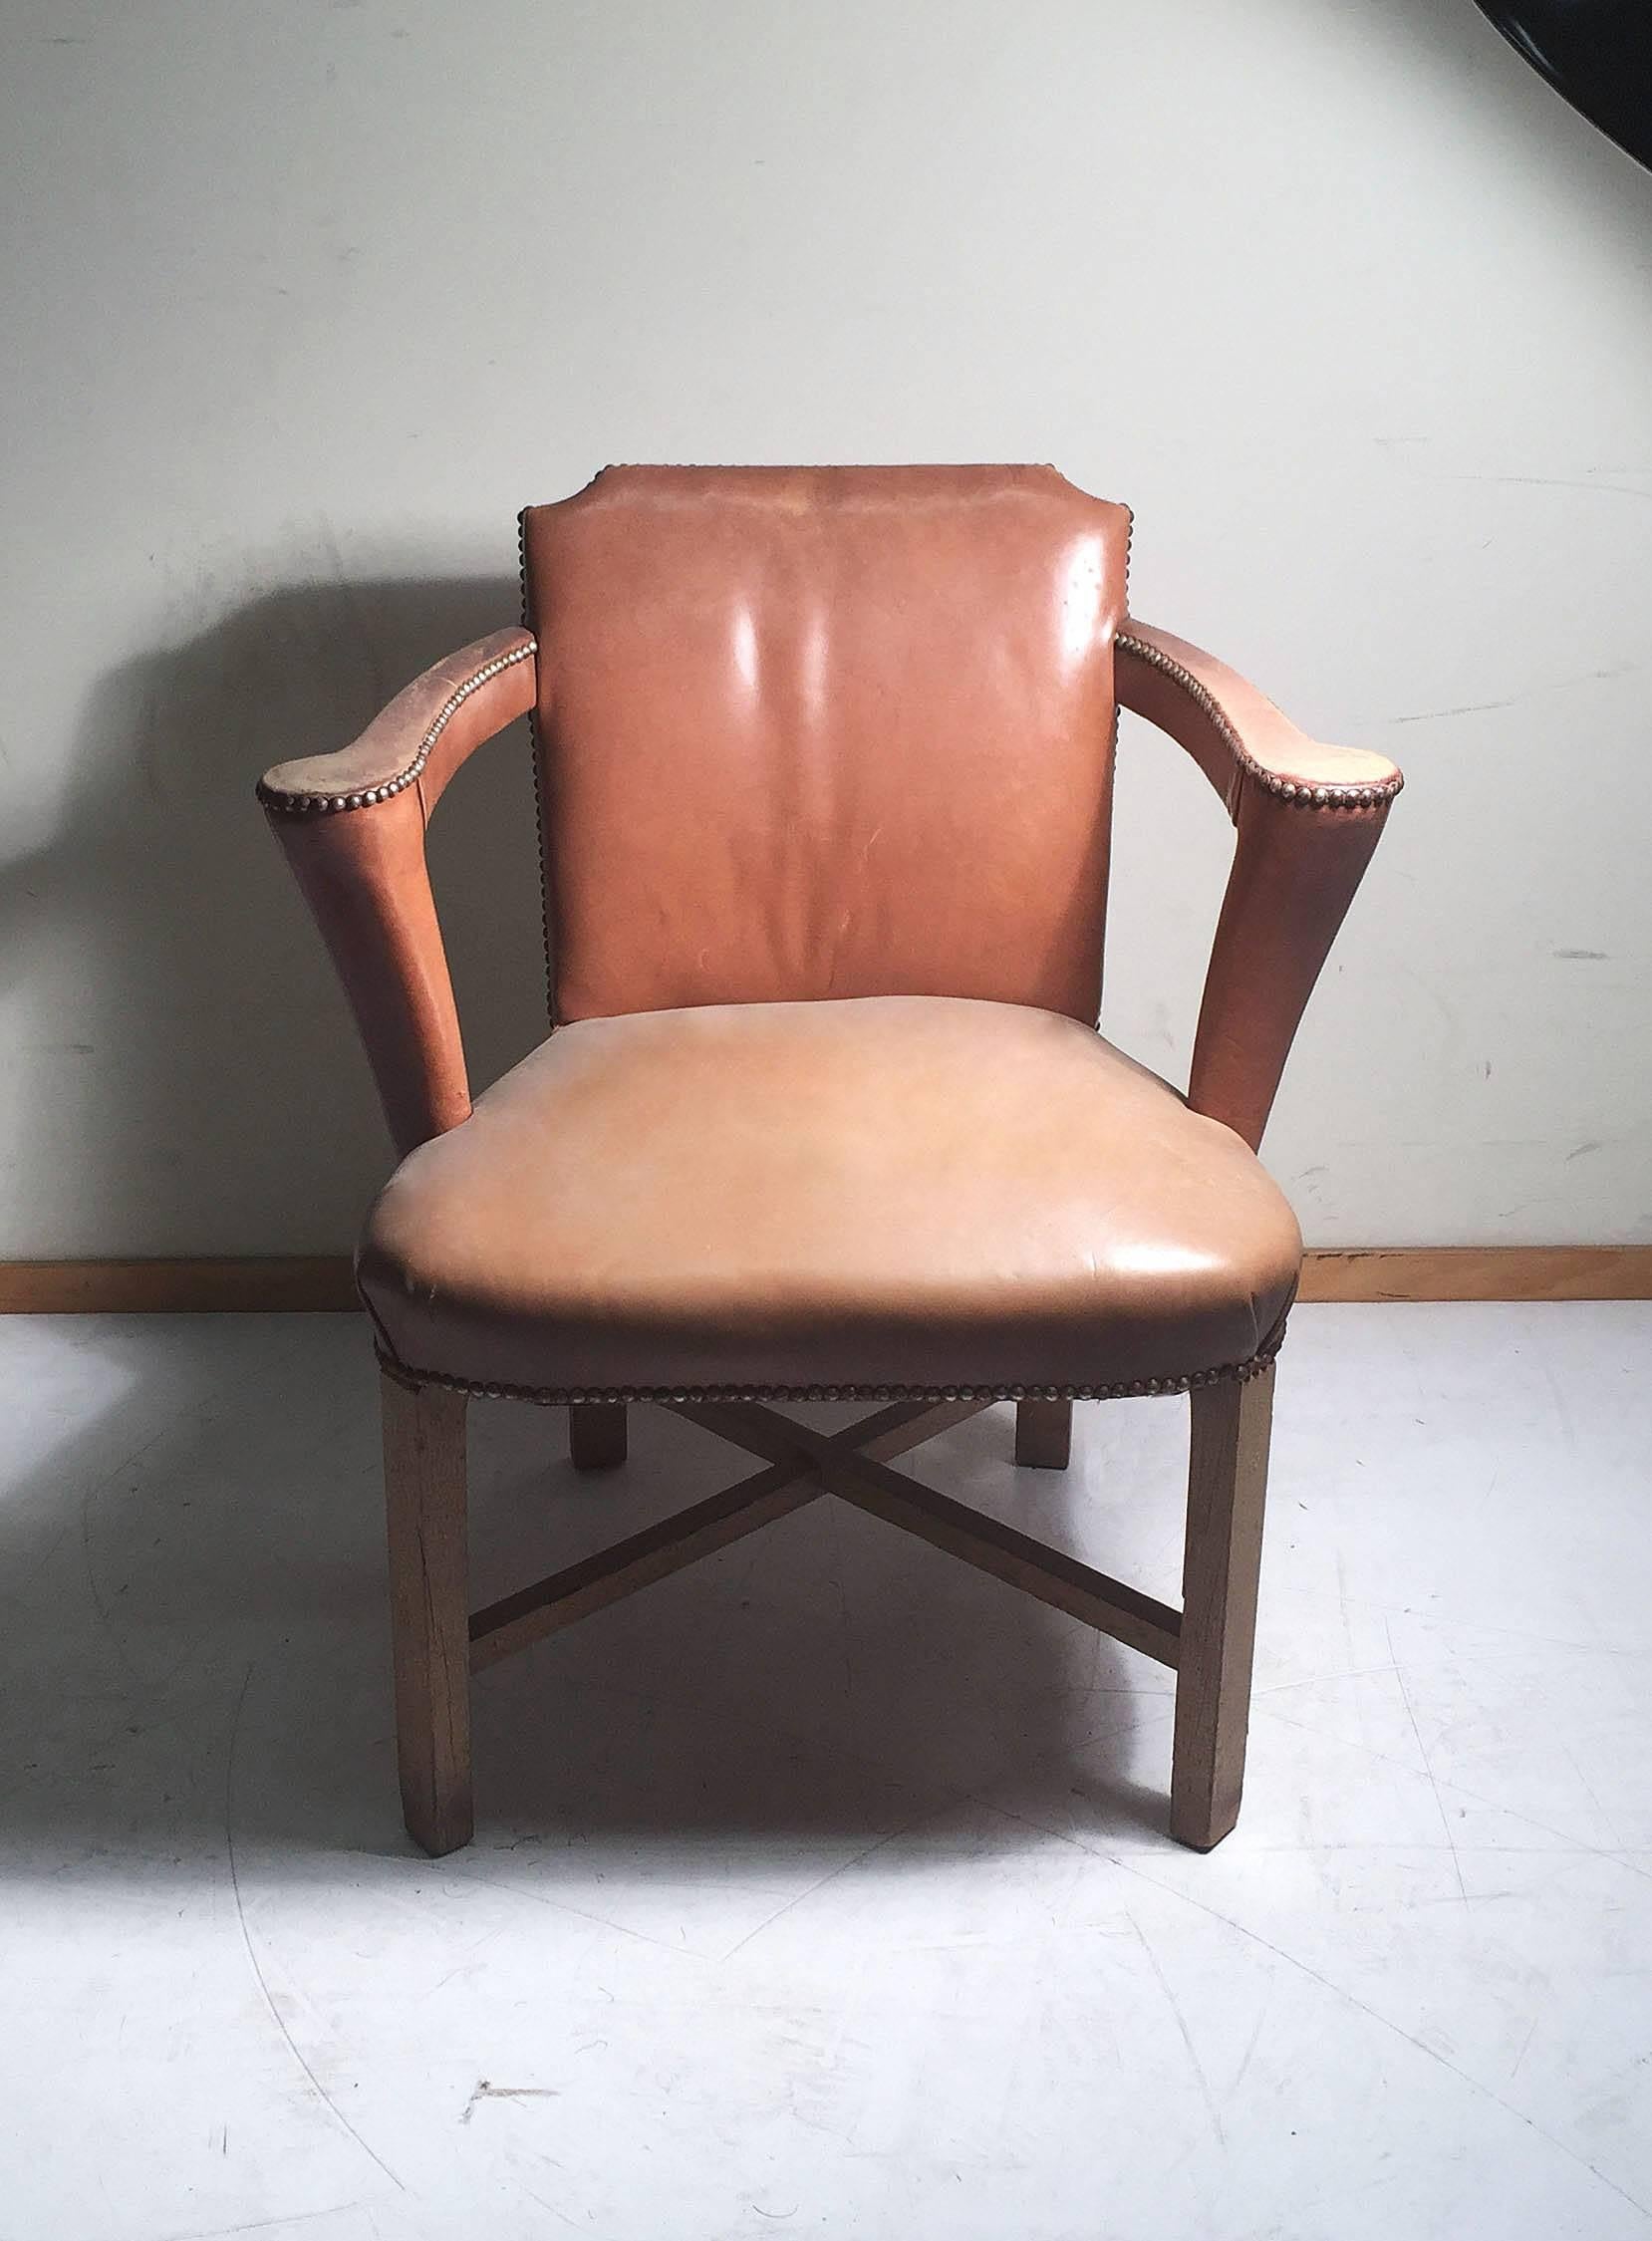 A really good period vintage modern / Hollywood Regency set of these chairs attributed to Syrie Maugham. These are shown in as-is found condition and would best be restored. Built solid. Structurally sound. More pics available upon request. Places